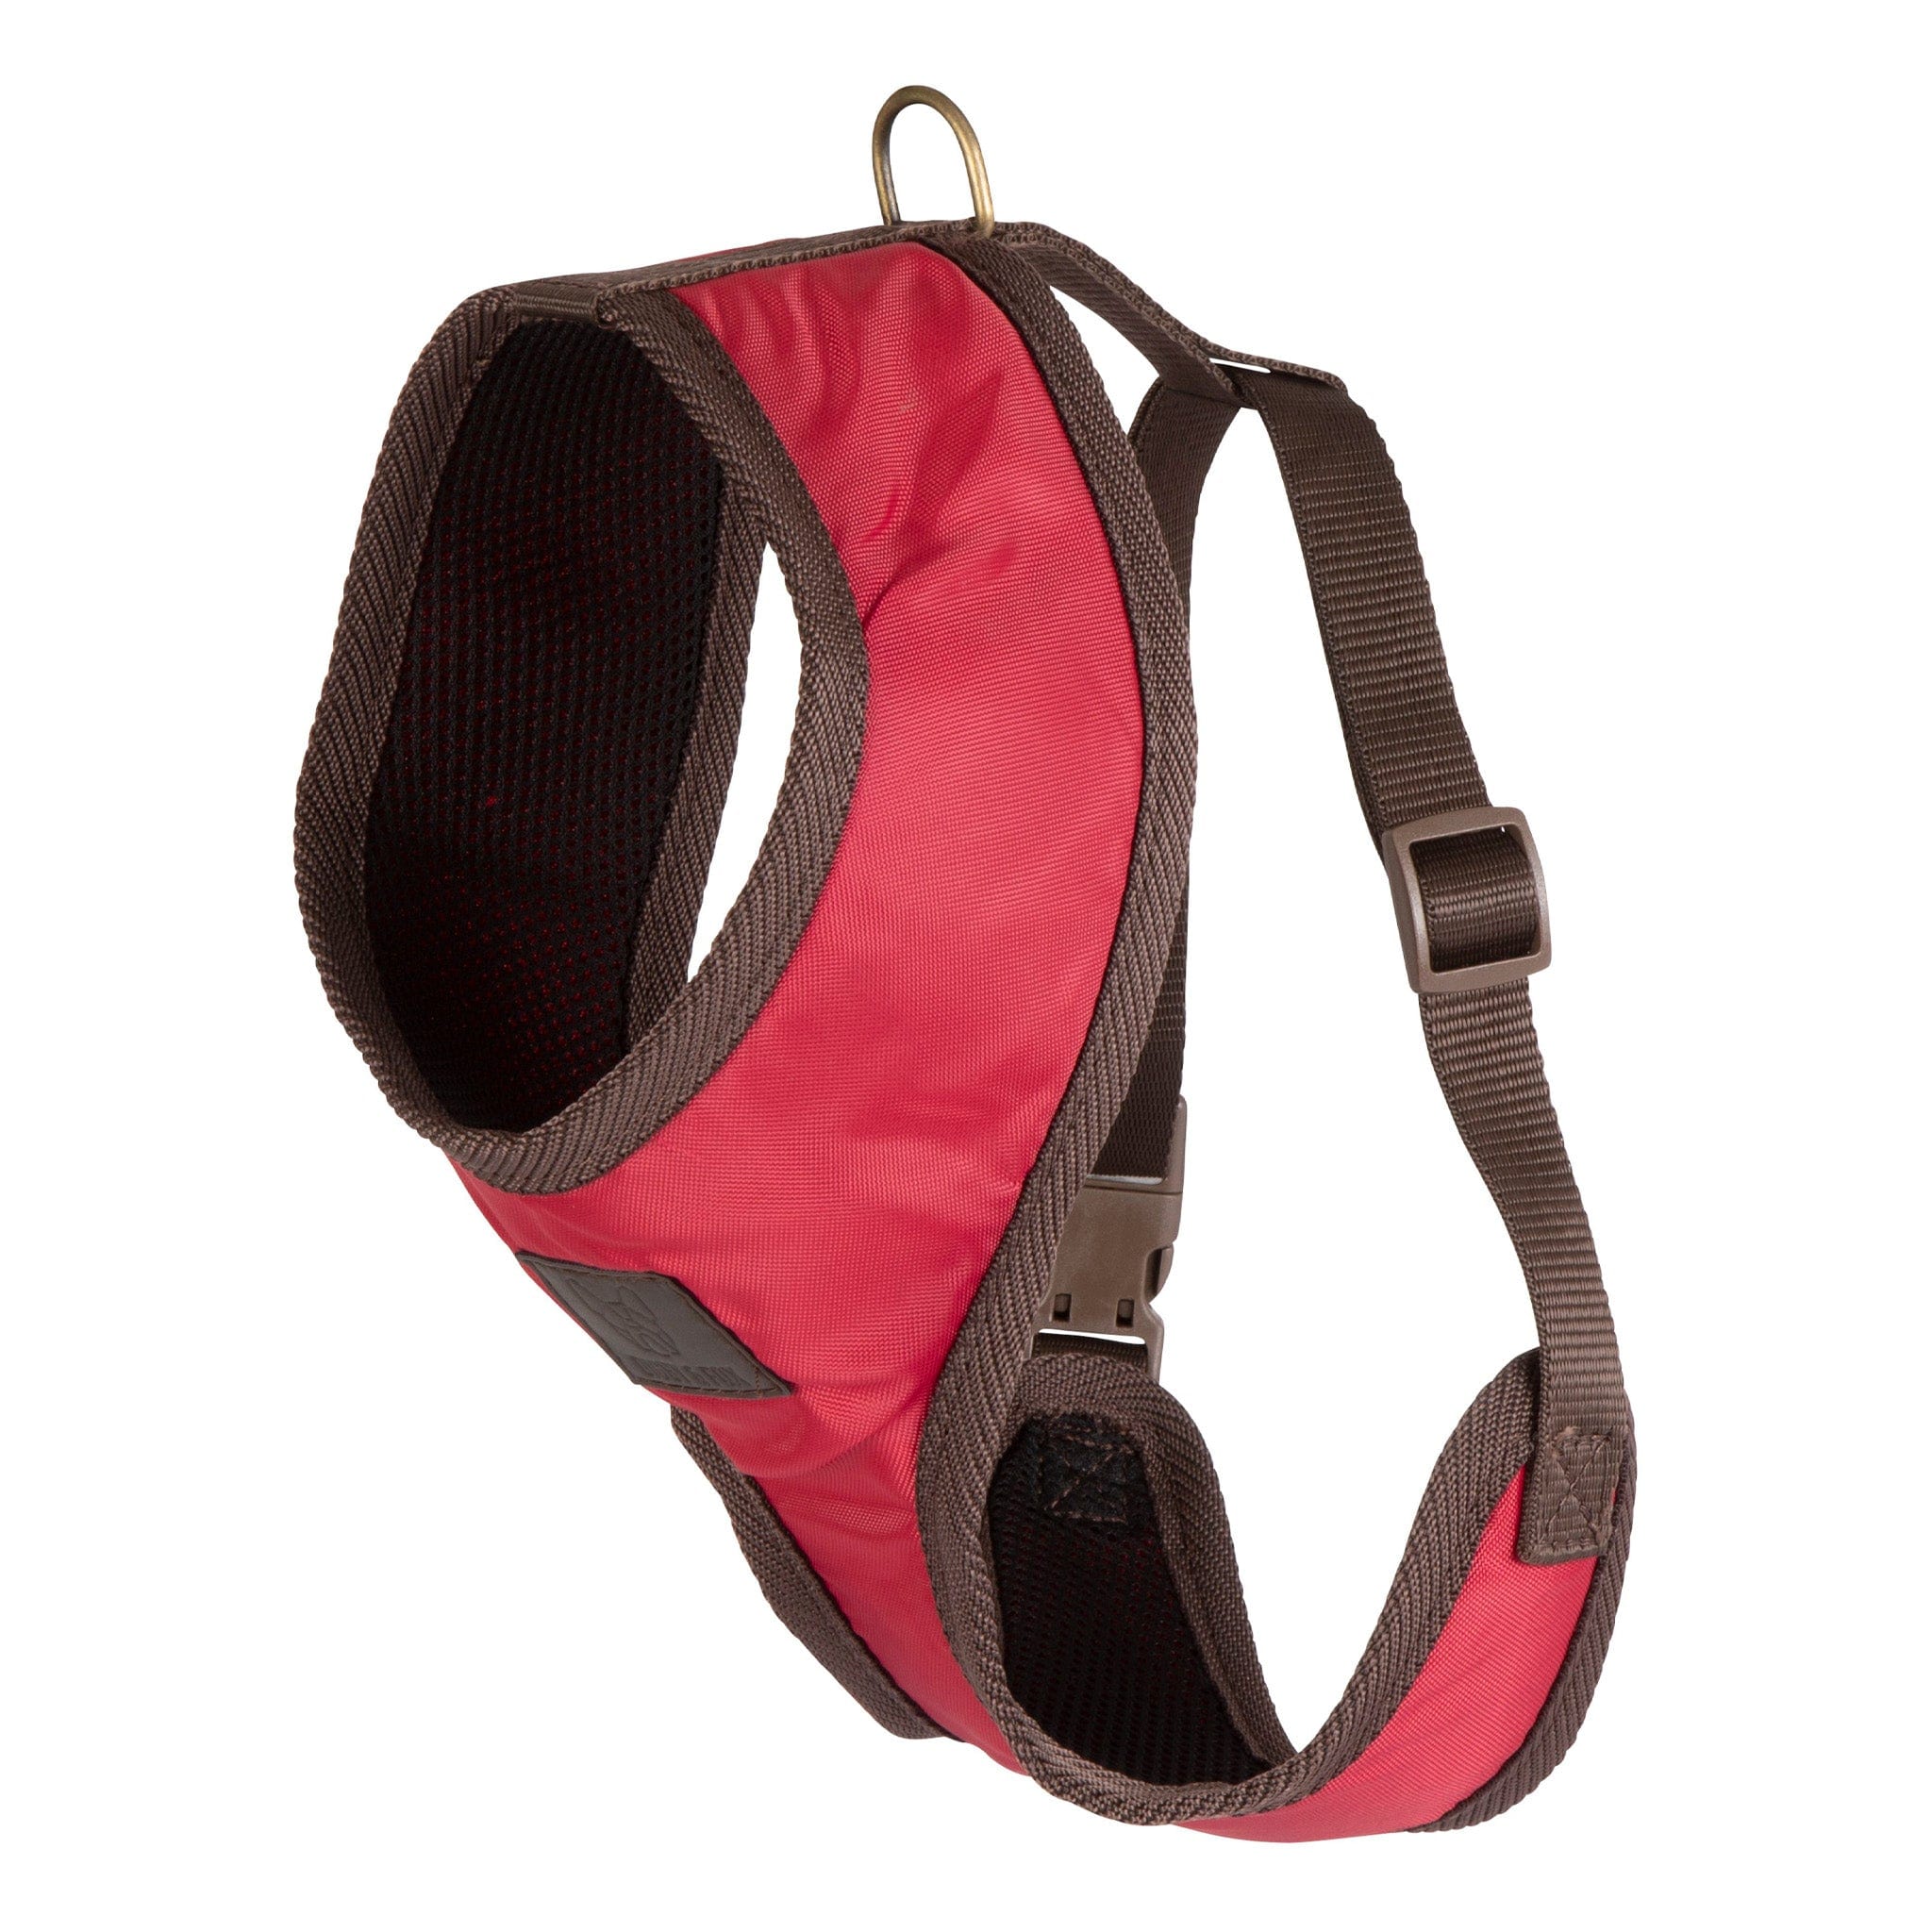 Shires Digby and Fox Heritage Dog Harness 6873 Scarlet Red